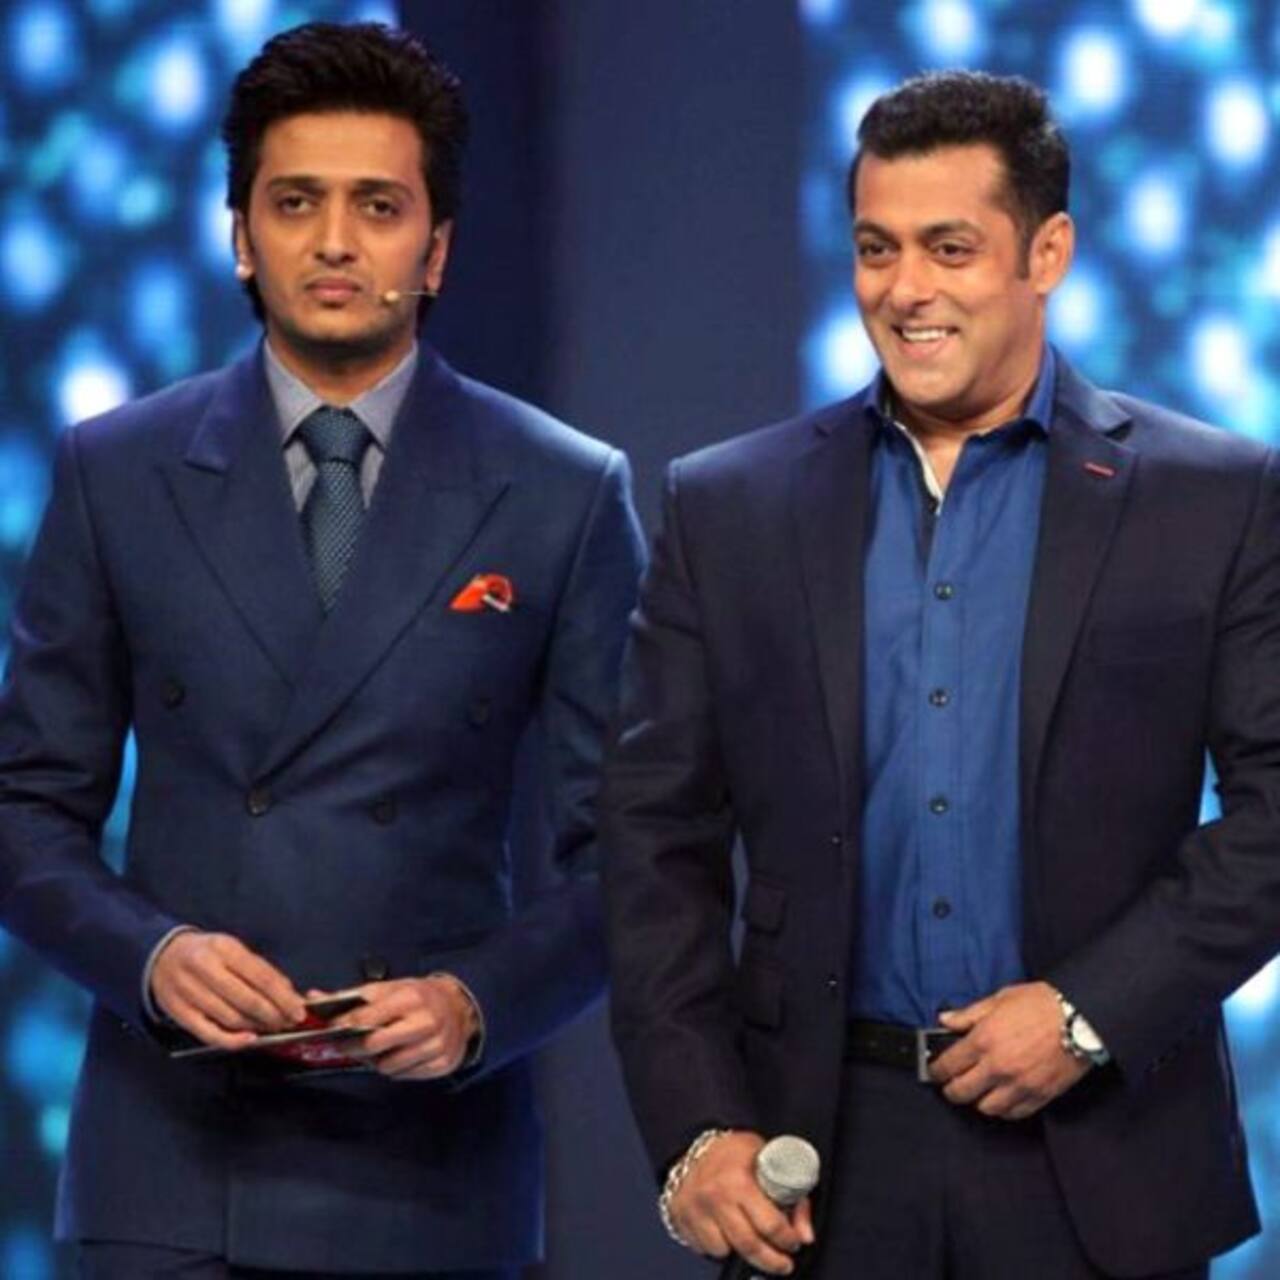 IIFA Awards 2022: Salman Khan gets upset with Riteish Deshmukh during the press conference; here's why [Watch]